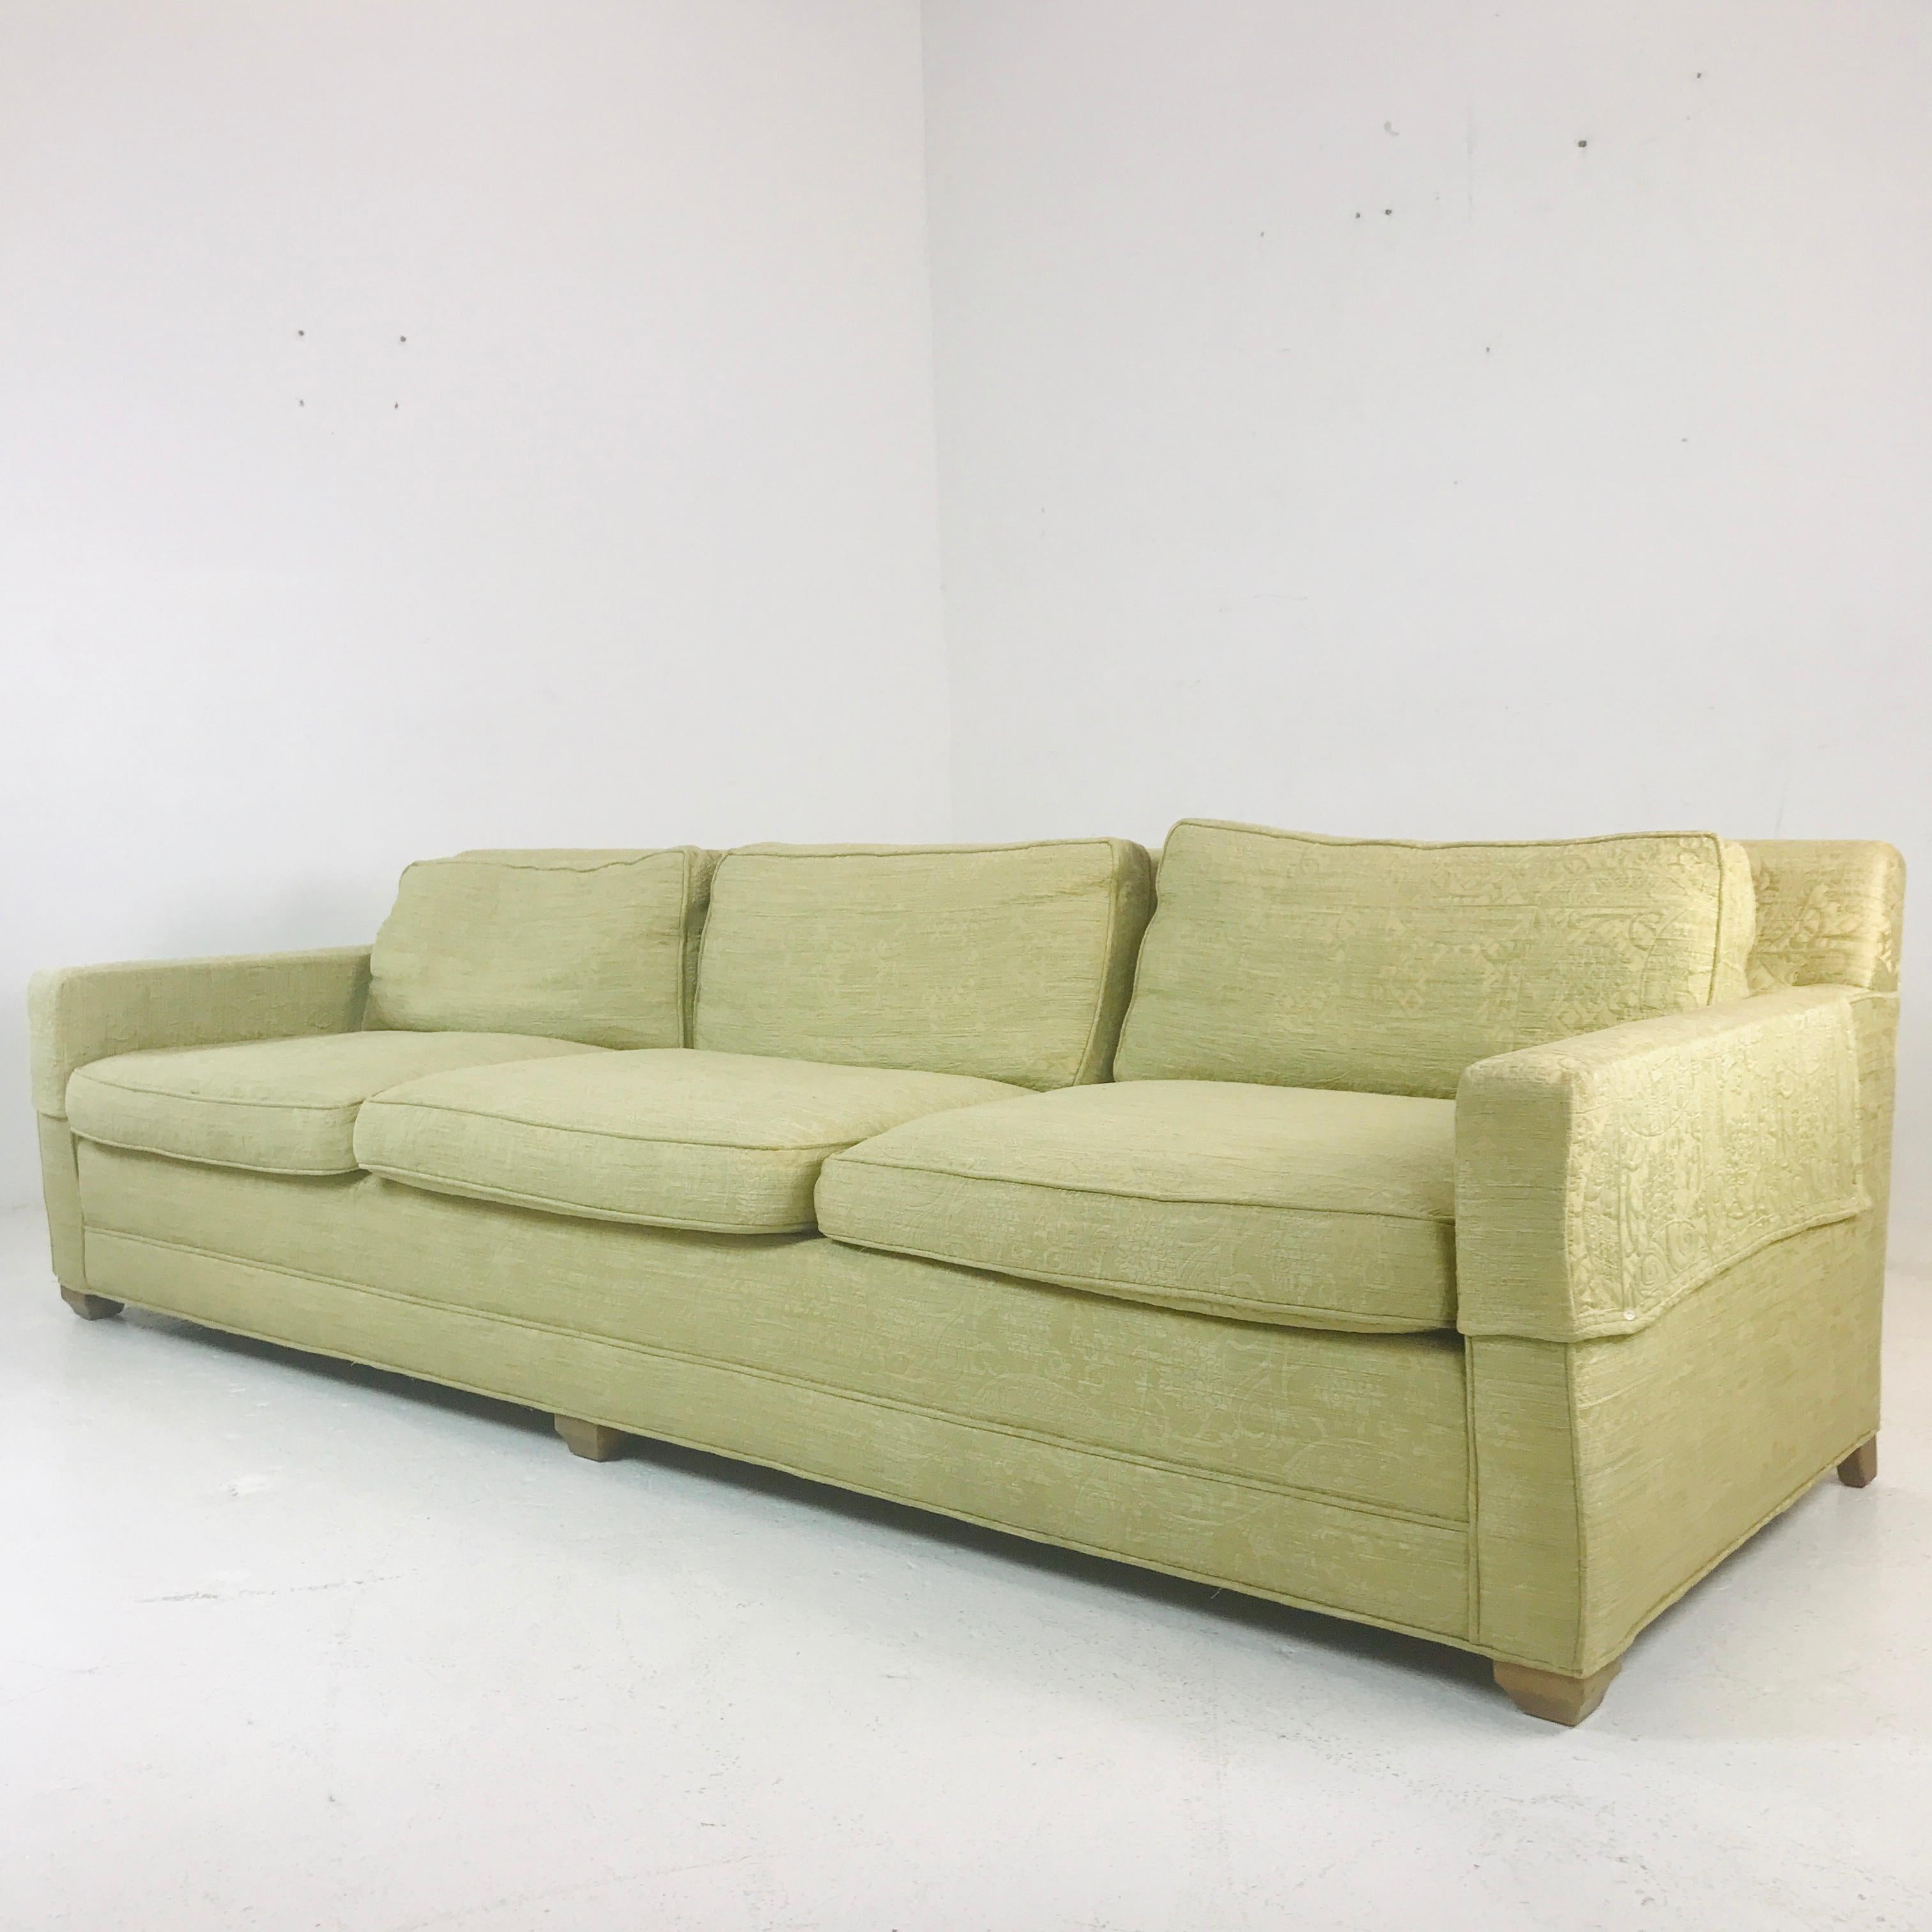 Timeless Classic low profile sofa with excellent proportion and scale. Can be reupholstered with our high quality workroom.
  